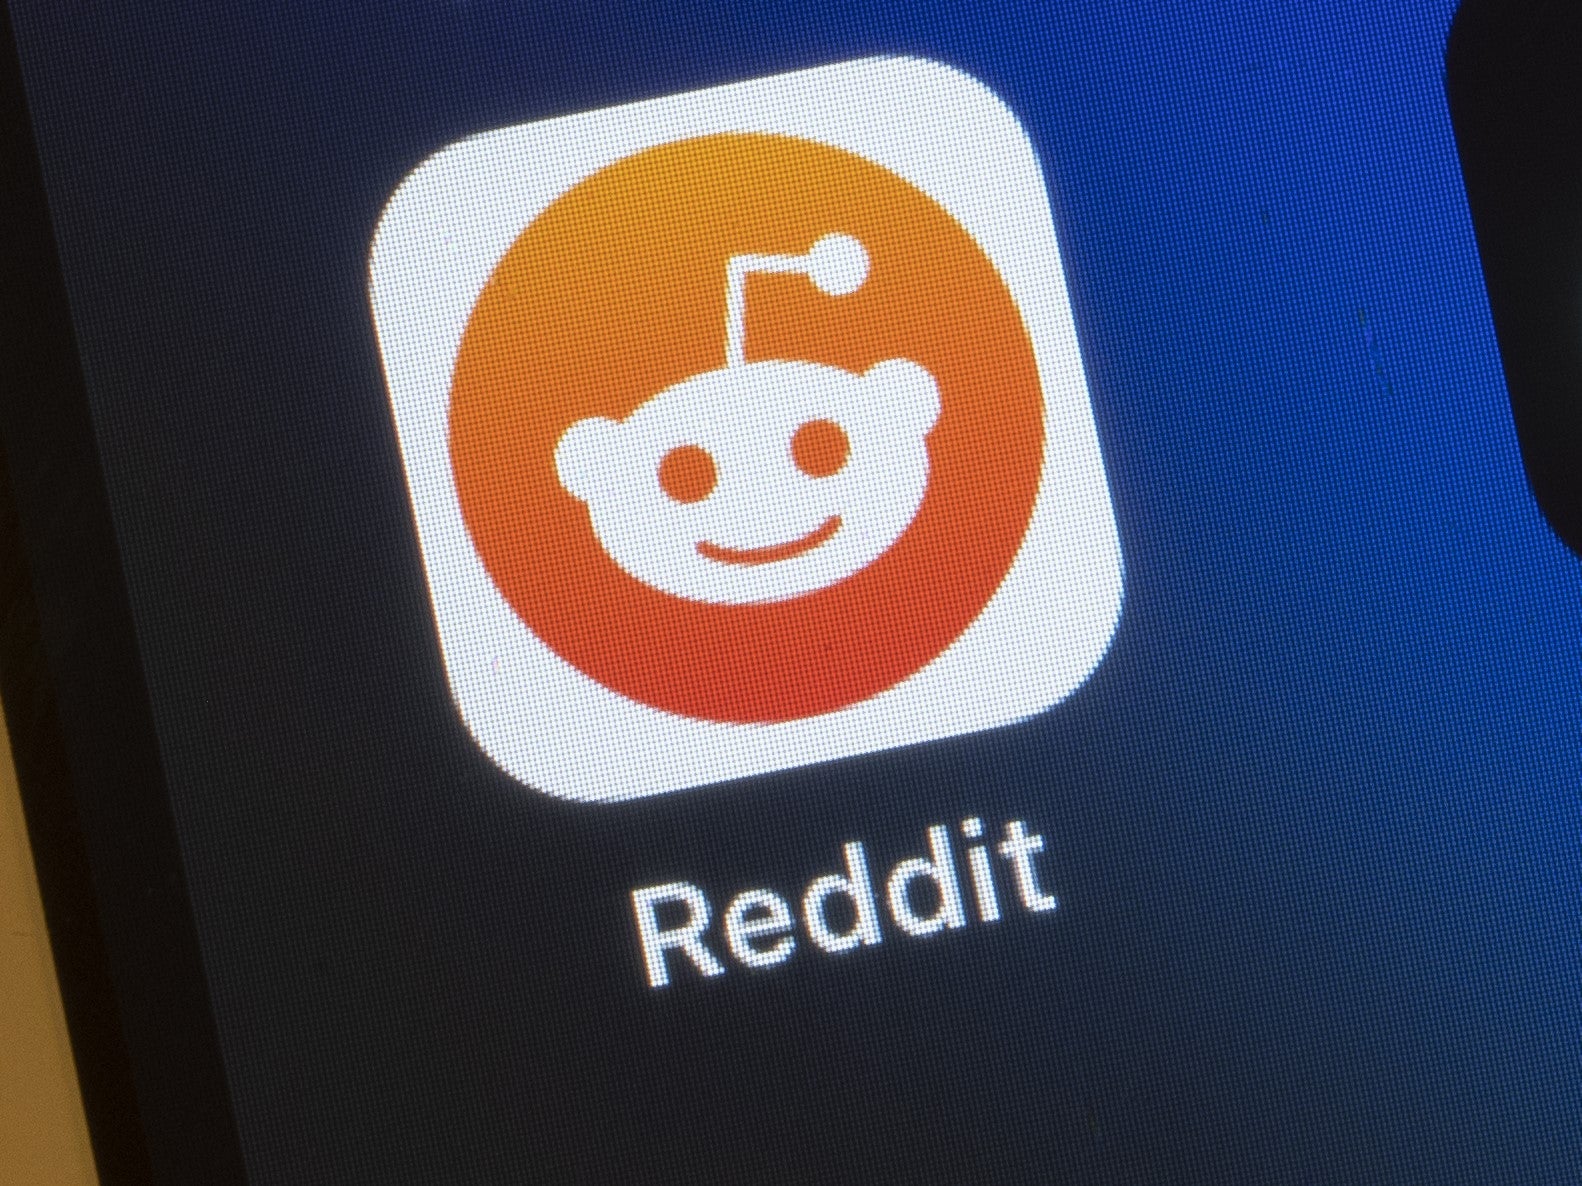 Reddit down Site hit by more outages as fight over its future escalates The Independent